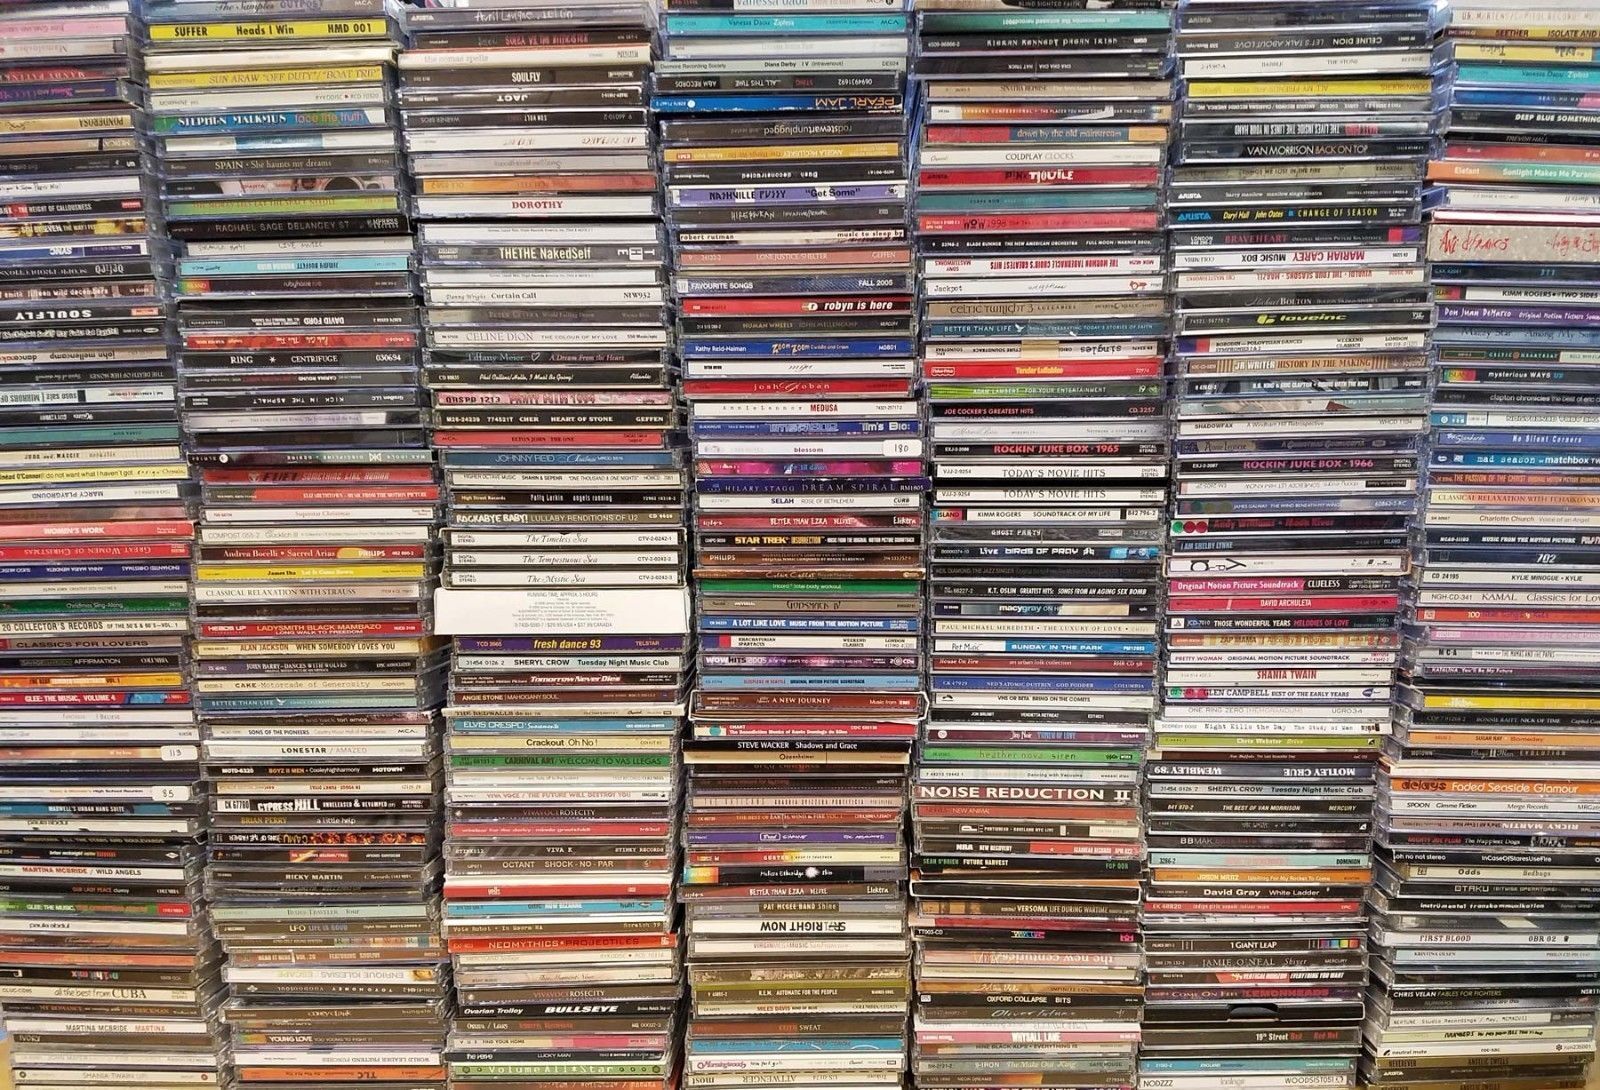 MASSIVE Lot of 200+ CD's Mixed Genres ROCK, POP, COUNTRY, RAP, INDIE Collection Без бренда